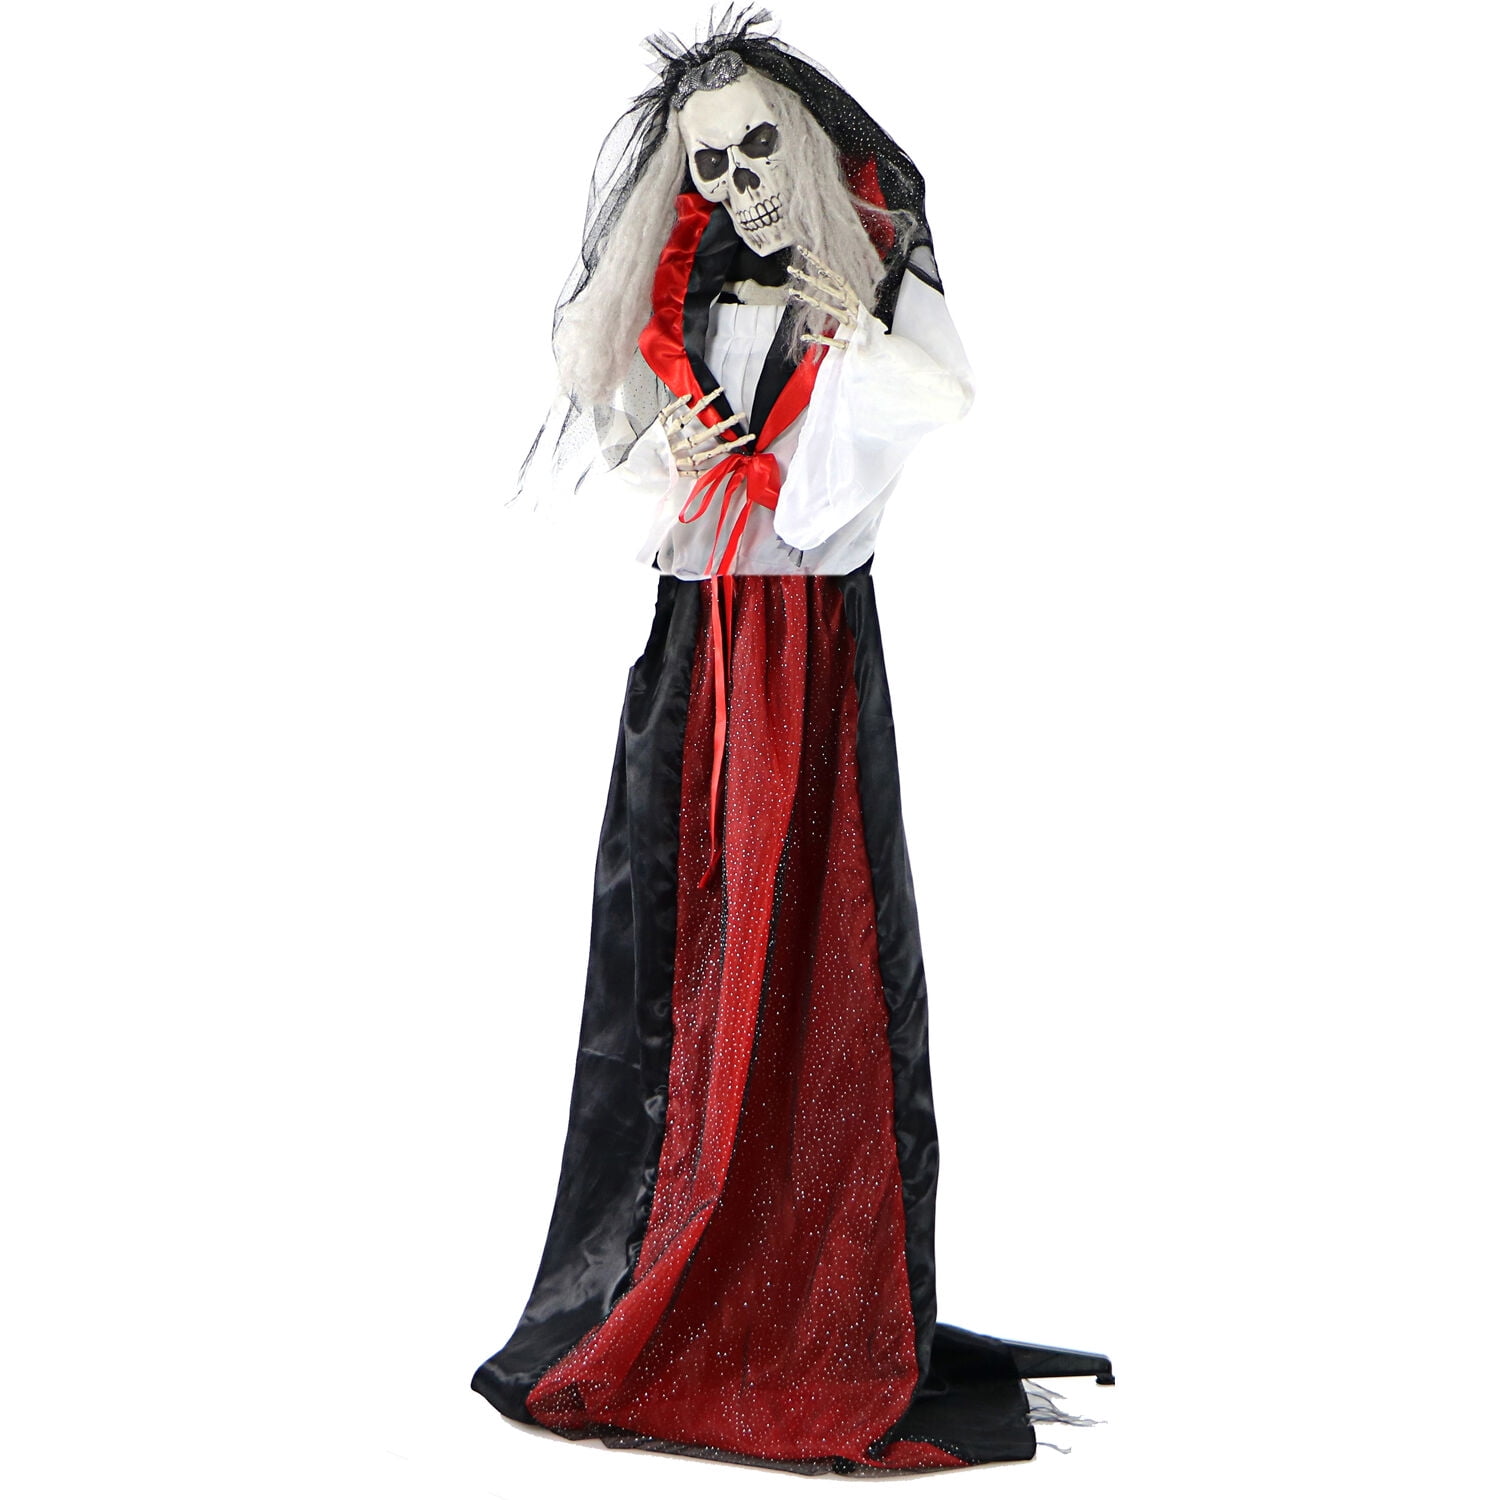 Haunted Hill Farm HHBRIDE-1FLSA Life-Size Animated Moaning Skeleton Bride Prop w/Flashing Red Eyes Indoor/Outdoor Halloween Decoration Color 11 